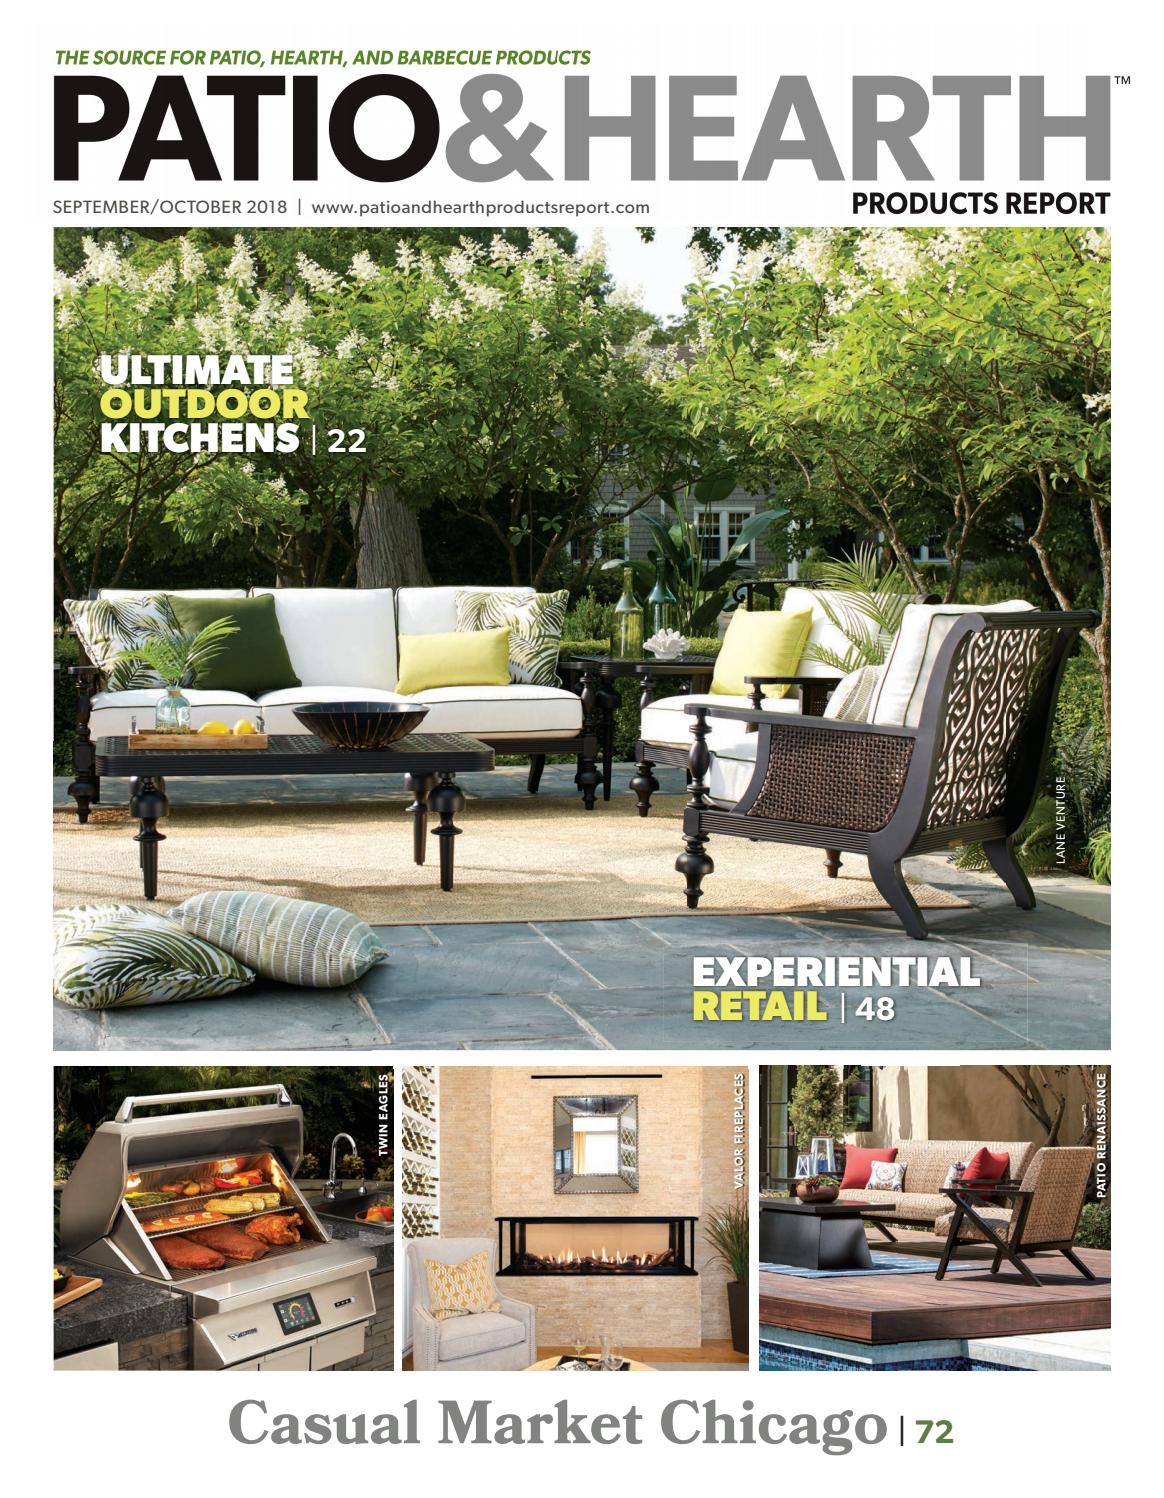 Montigo Fireplace Parts Lovely Patio & Hearth Products Report September October 2018 by